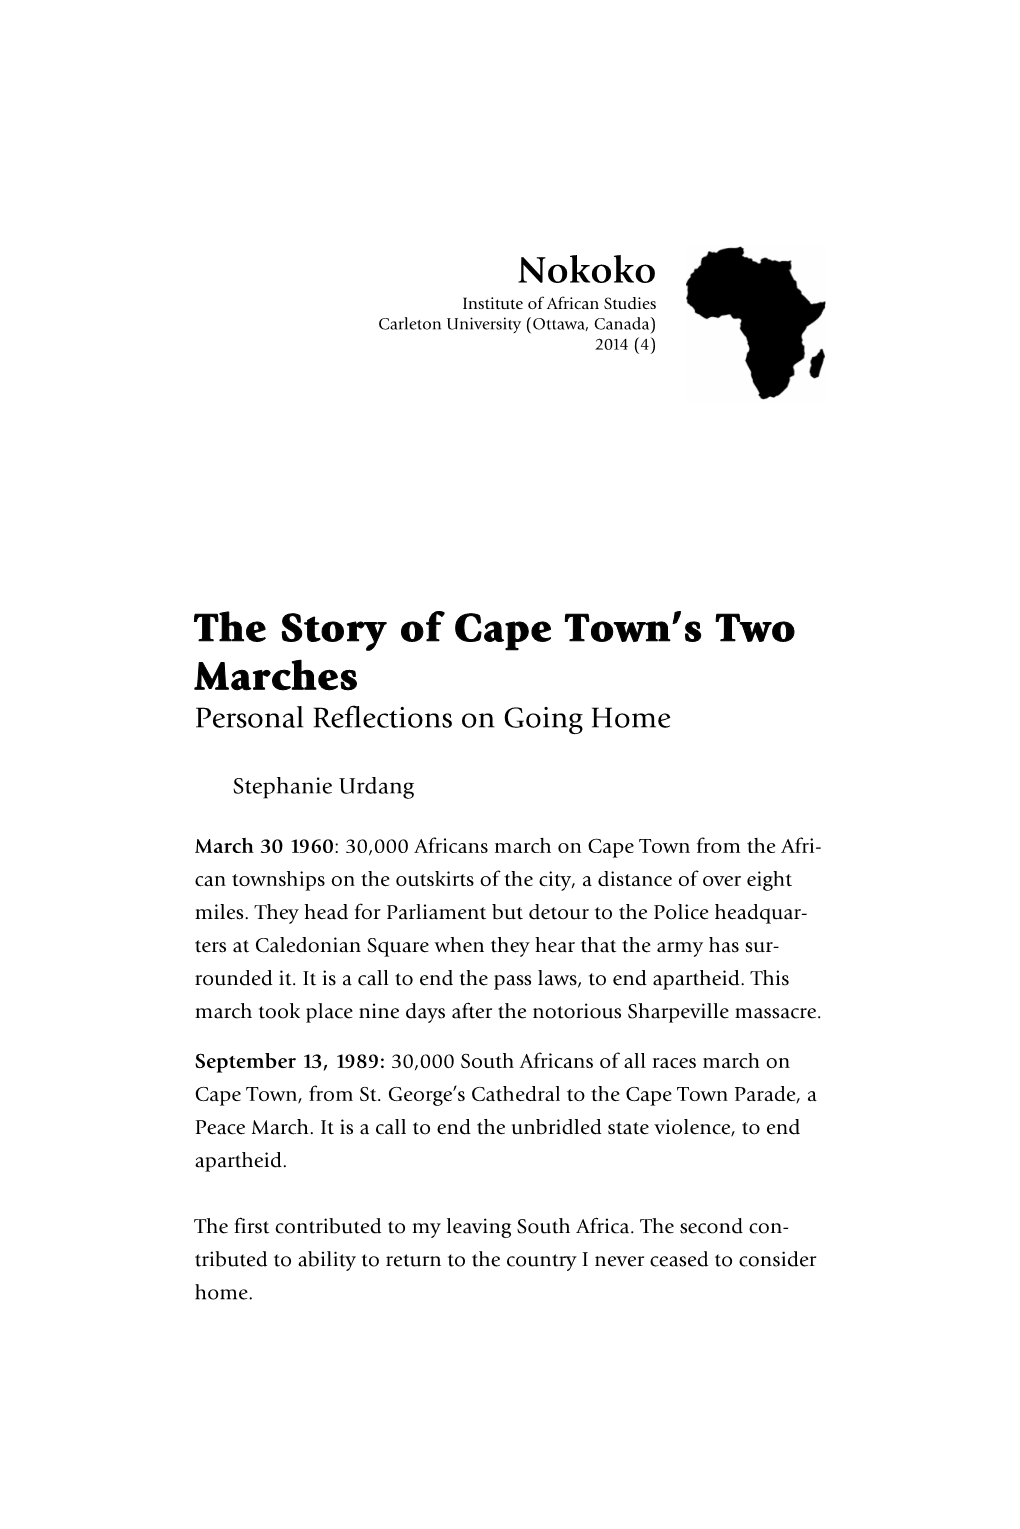 The Story of Cape Town's Two Marches